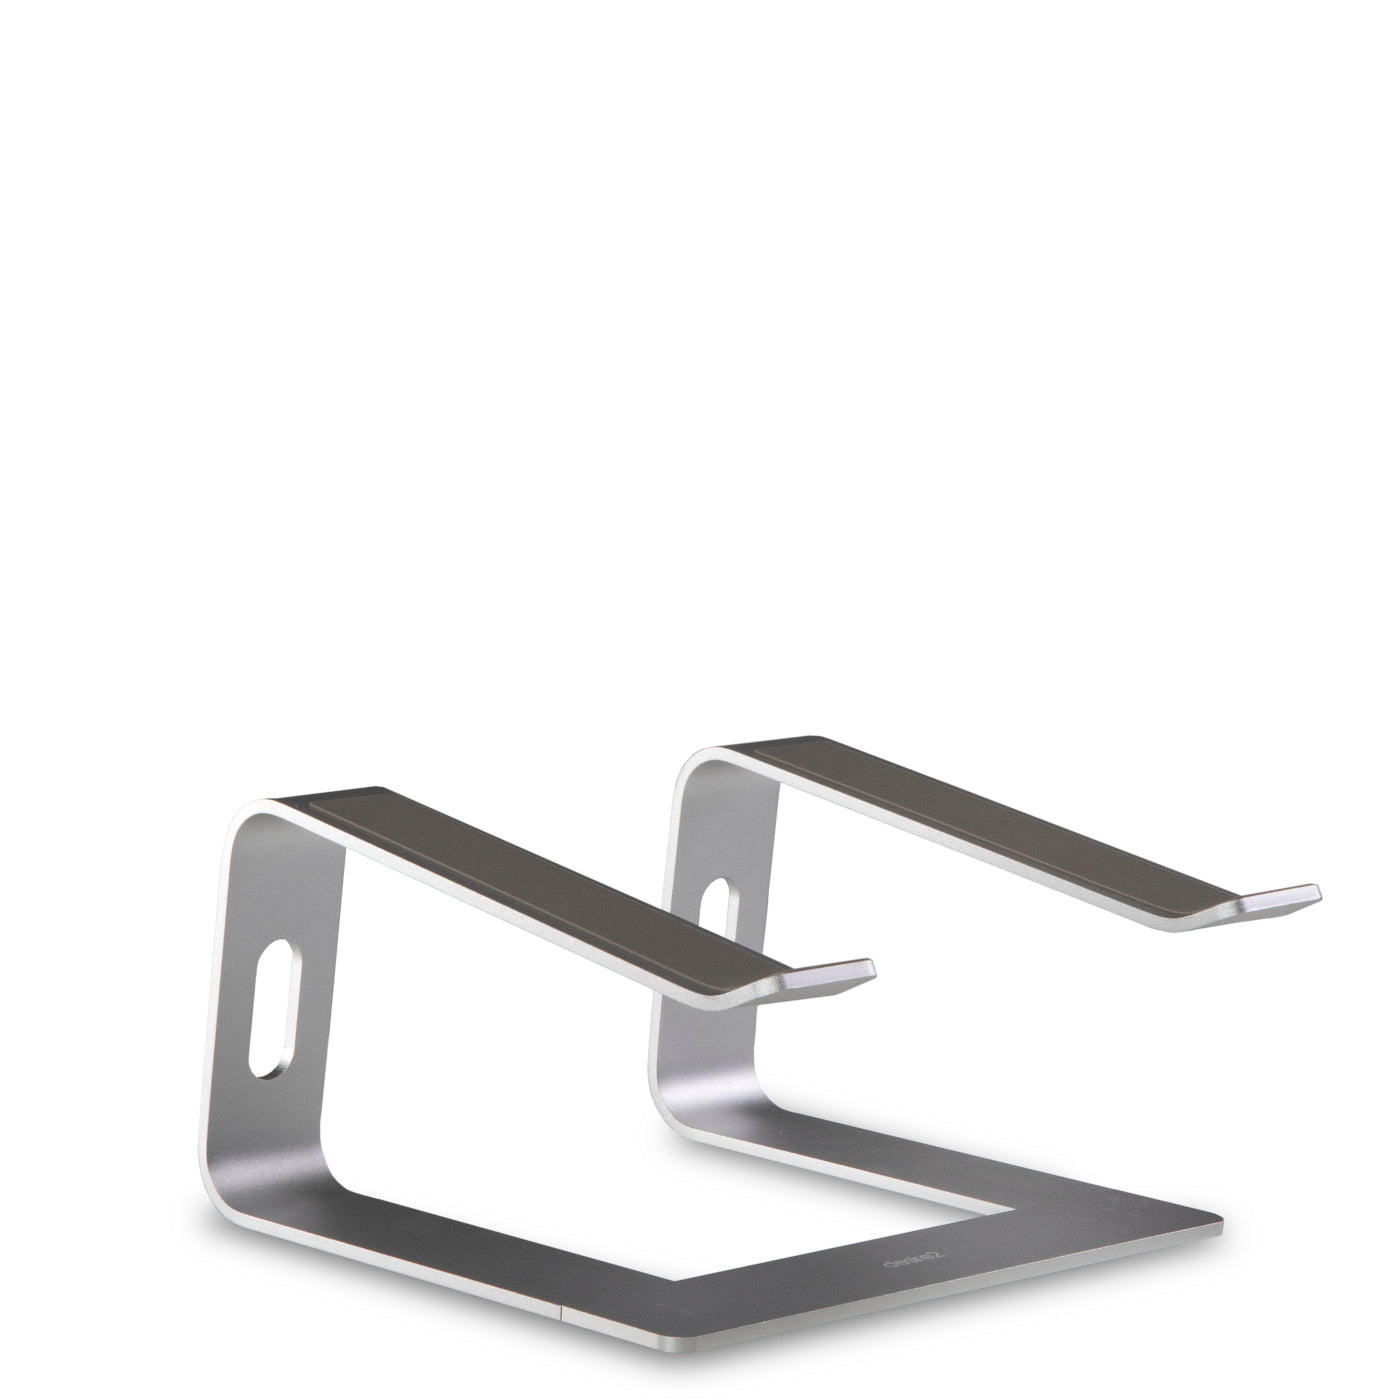 A well engineered silver aluminium riser stand for laptop or macbook